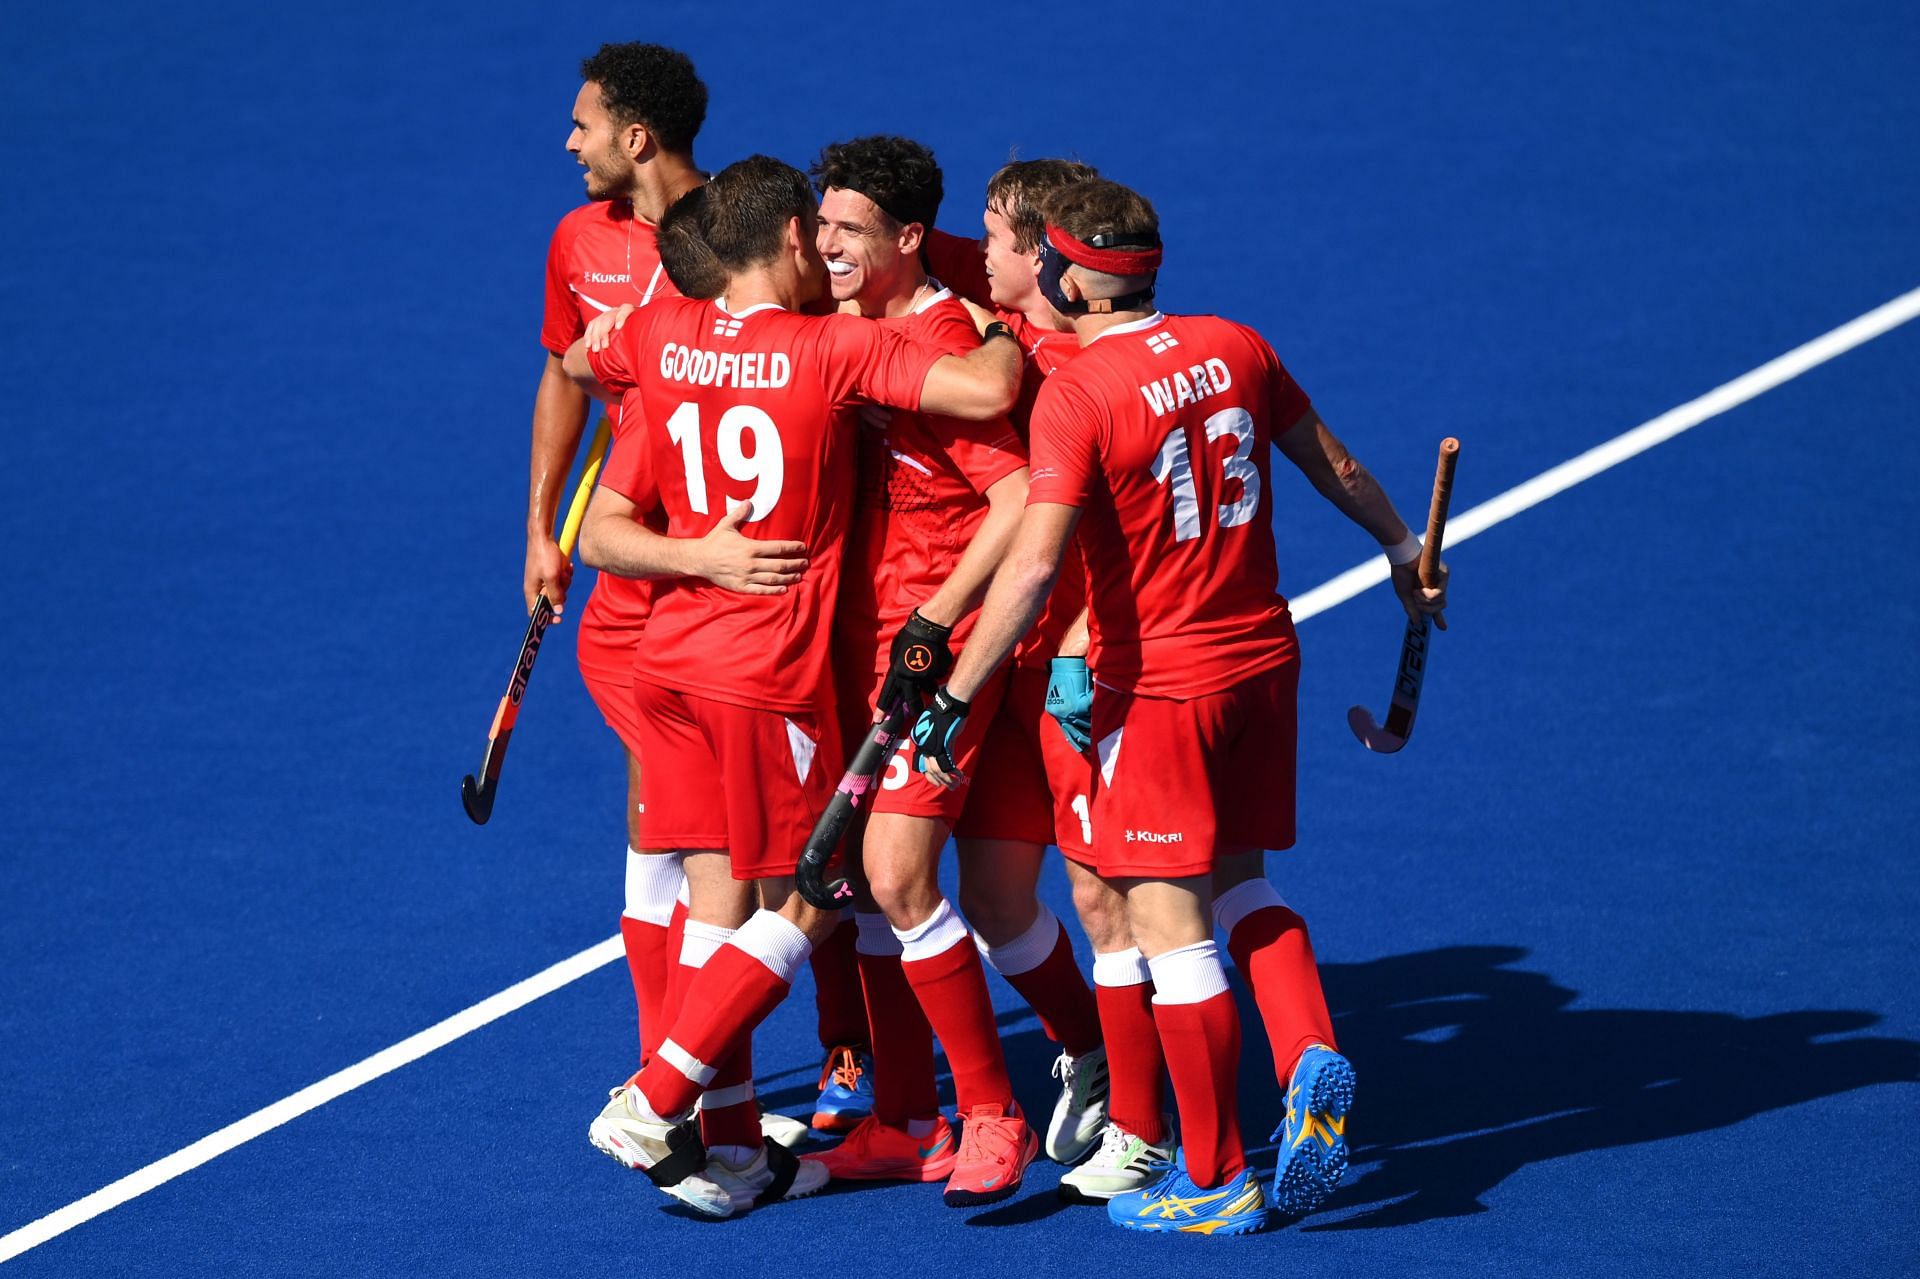 England are a team in form ahead of the Hockey World Cup